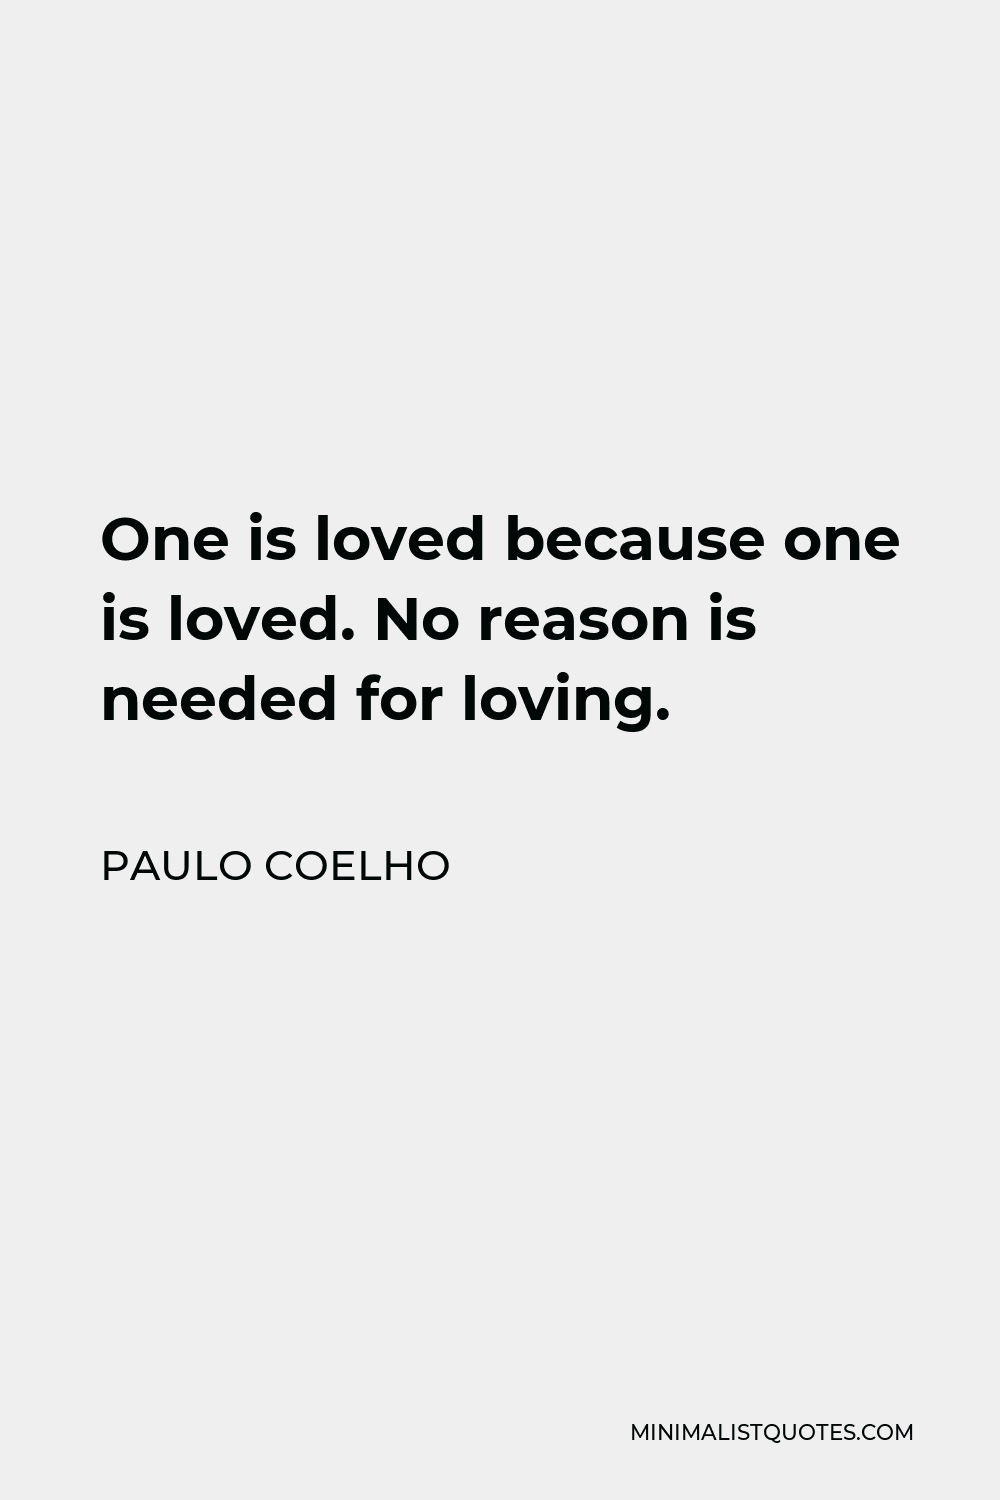 Paulo Coelho Quote - One is loved because one is loved. No reason is needed for loving.